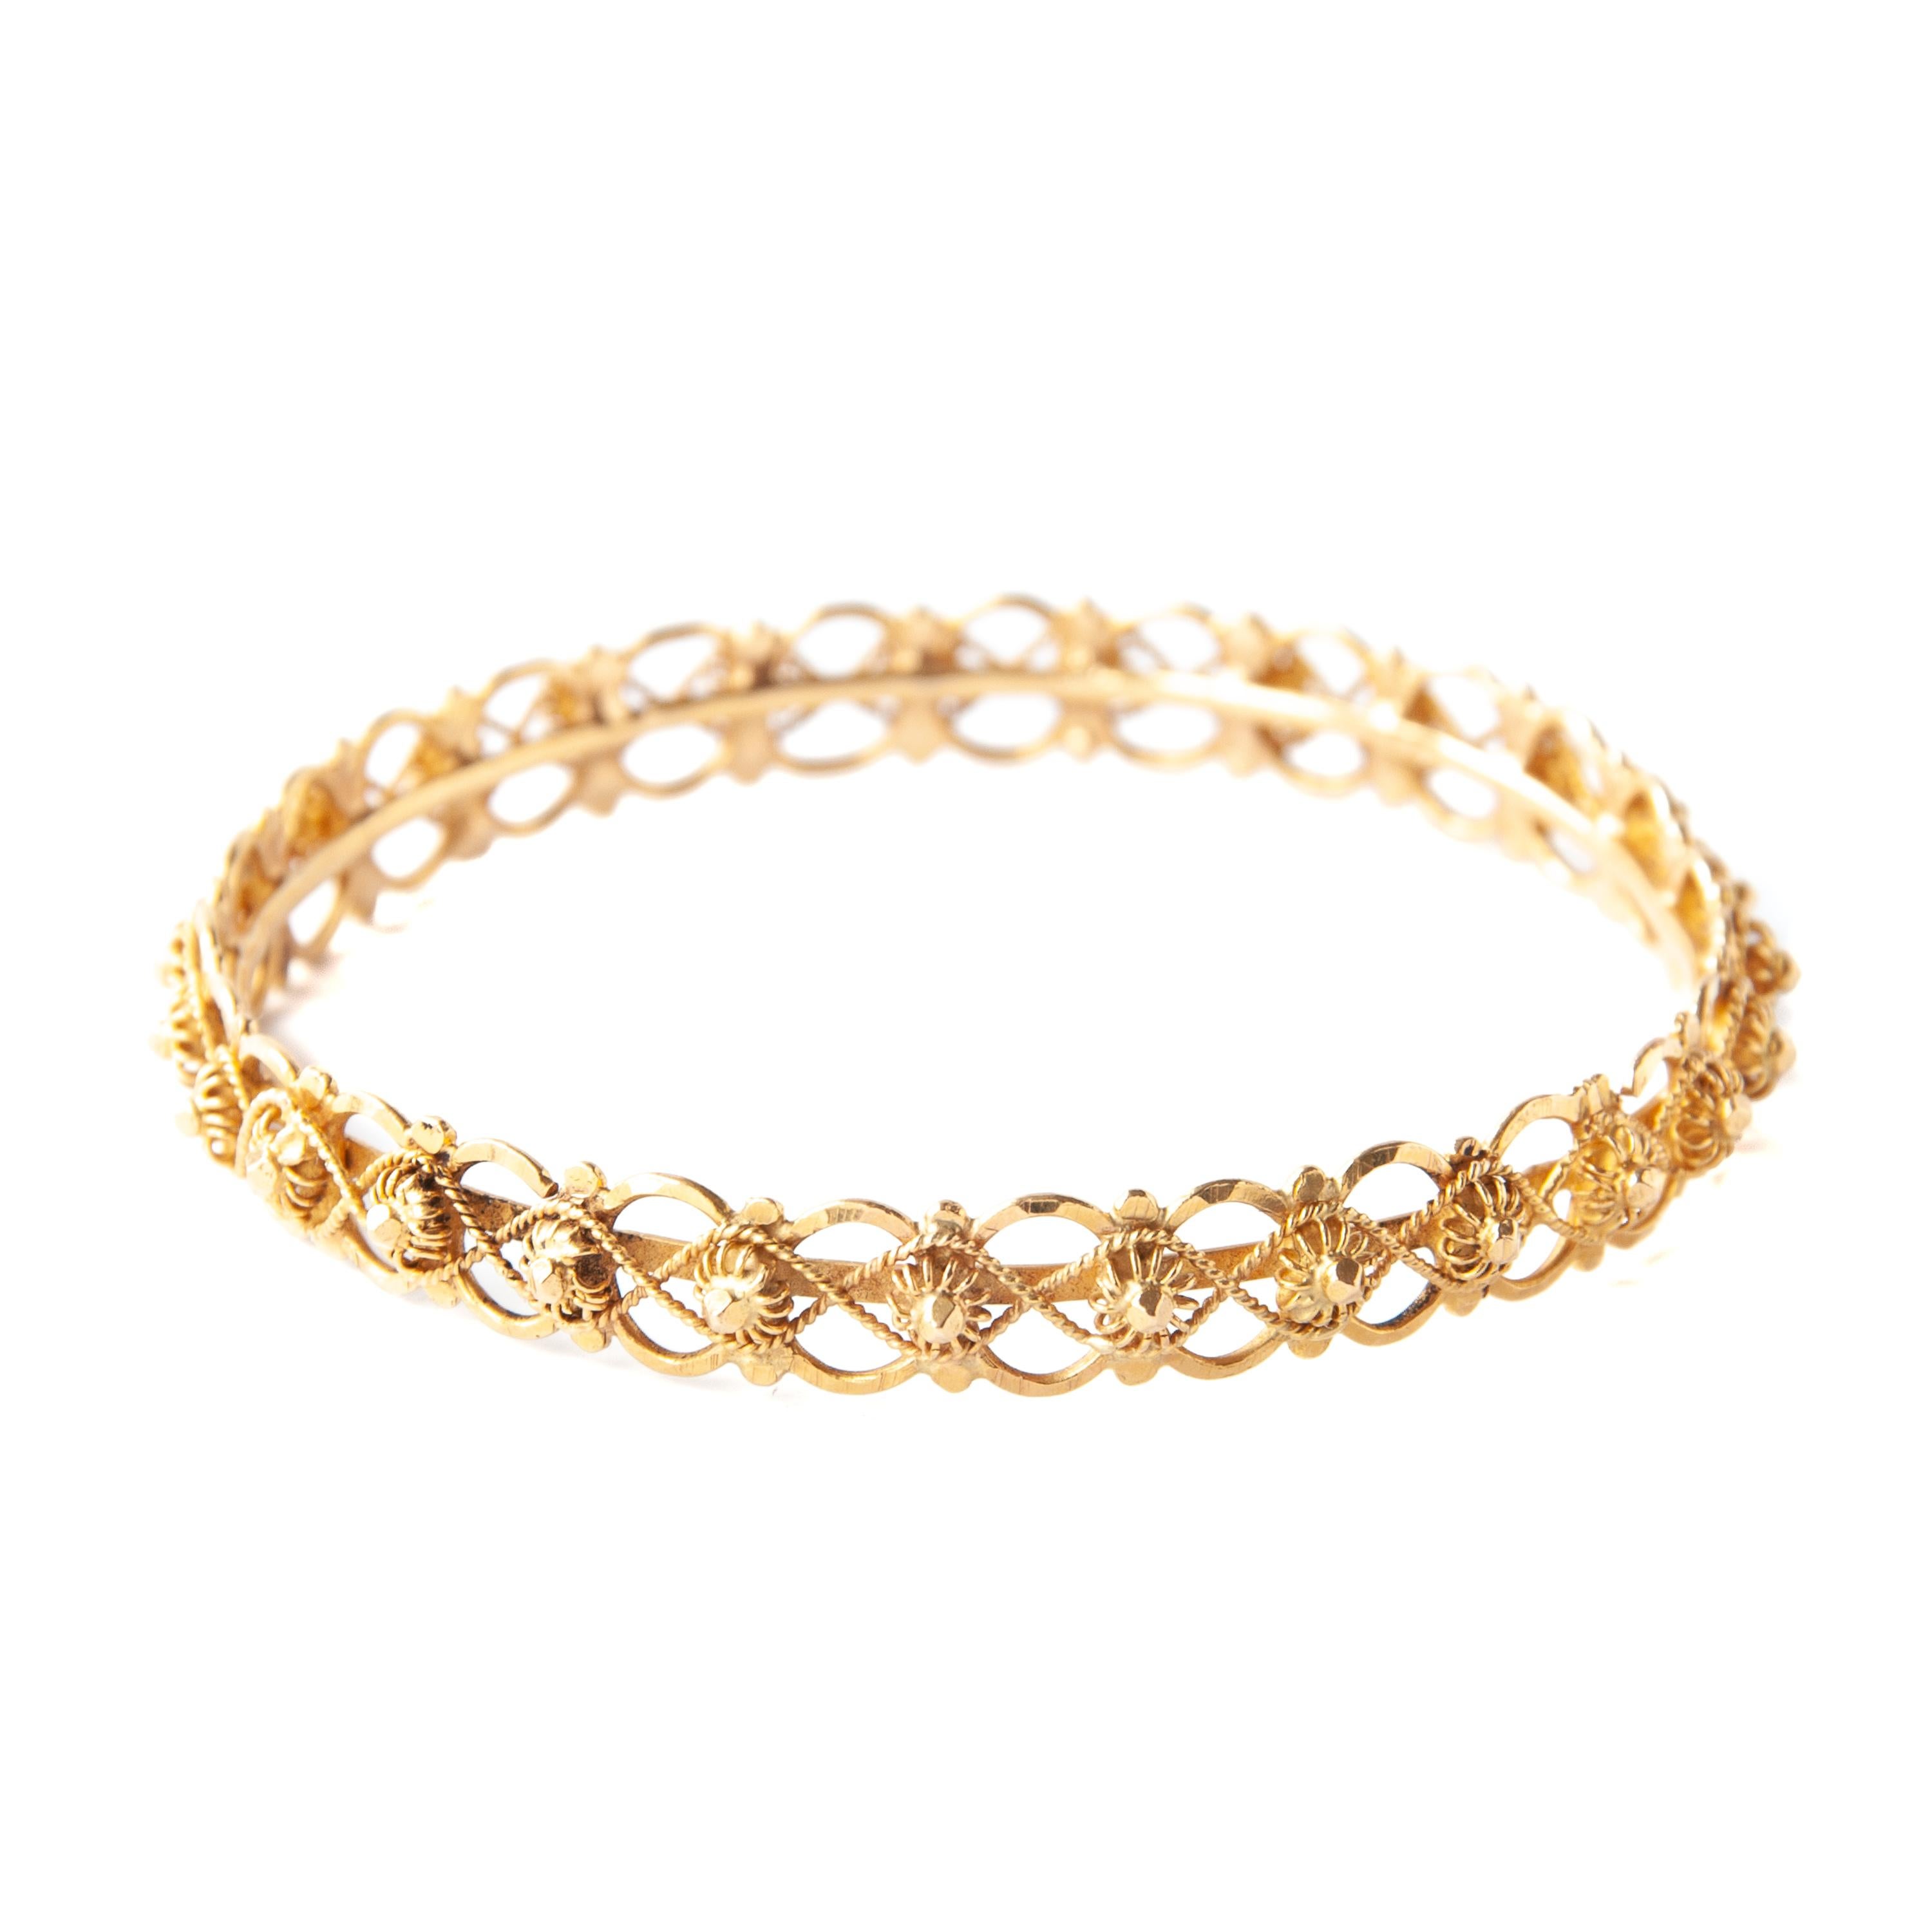 Vintage 20K Yellow Gold Openwork Cannetille Bangle Bracelet In Good Condition For Sale In Rotterdam, NL